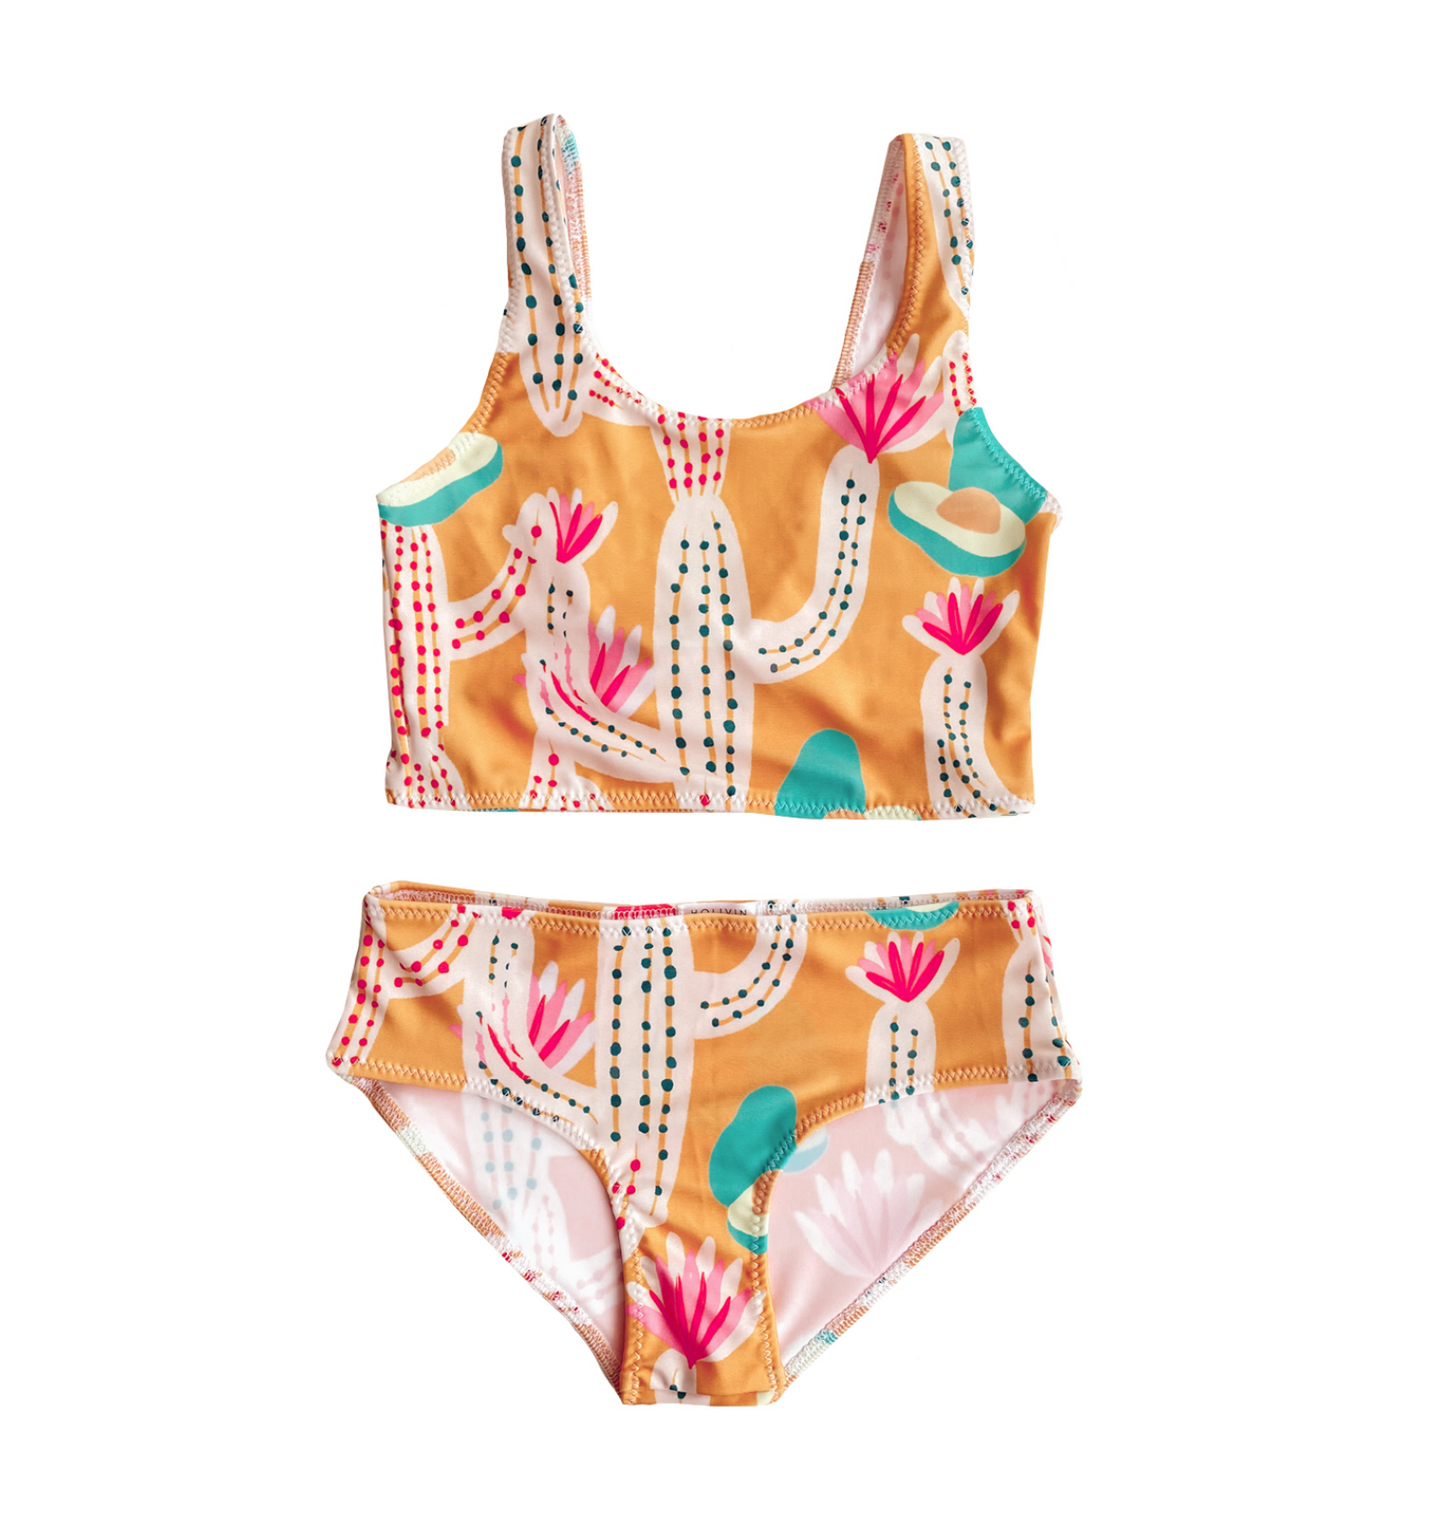 Holivin "Cactus and Avocado" Swimsuit